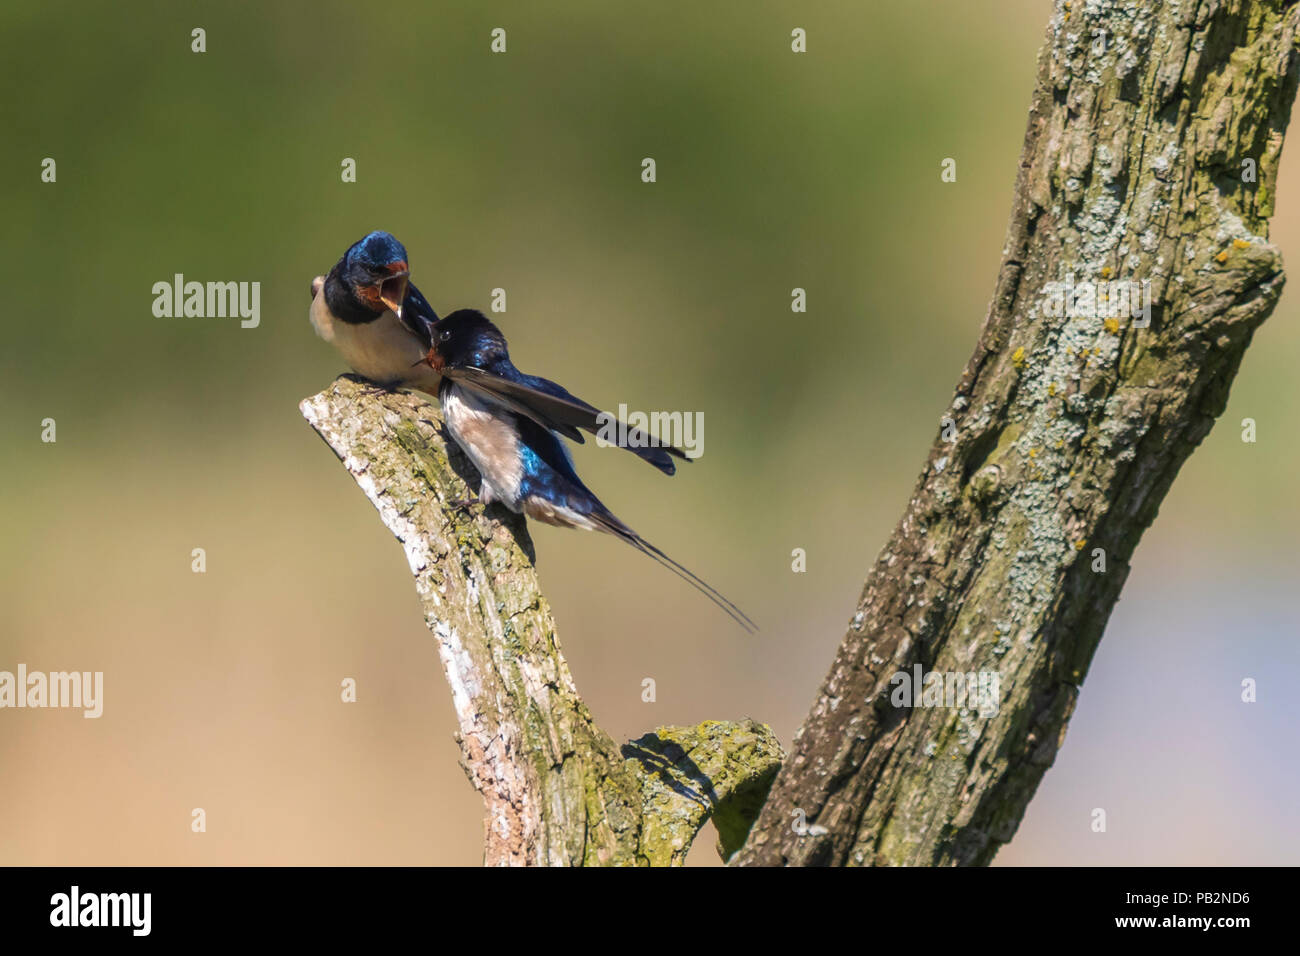 BBarn Swallow bird (Hirundo rustica) perched on a wooden log during Springtime. A large group of these barn swallows foraging and hunts insects and ta Stock Photo